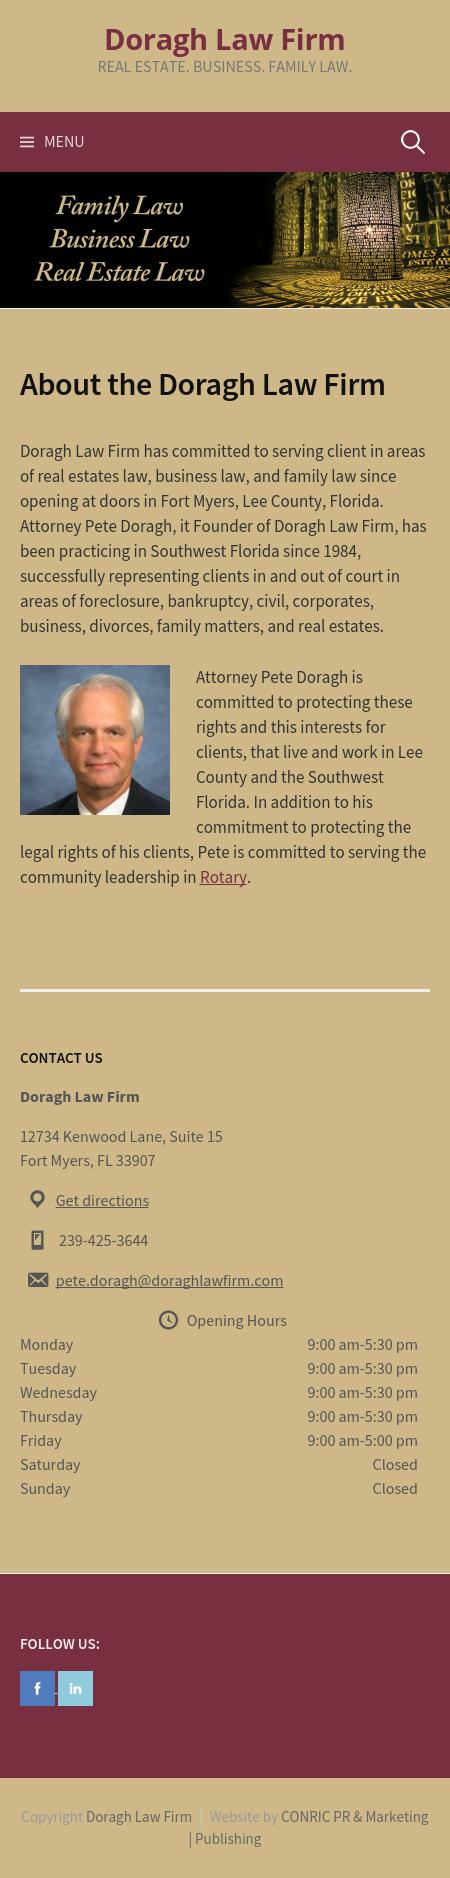 The Doragh Law Firm - Fort Myers FL Lawyers